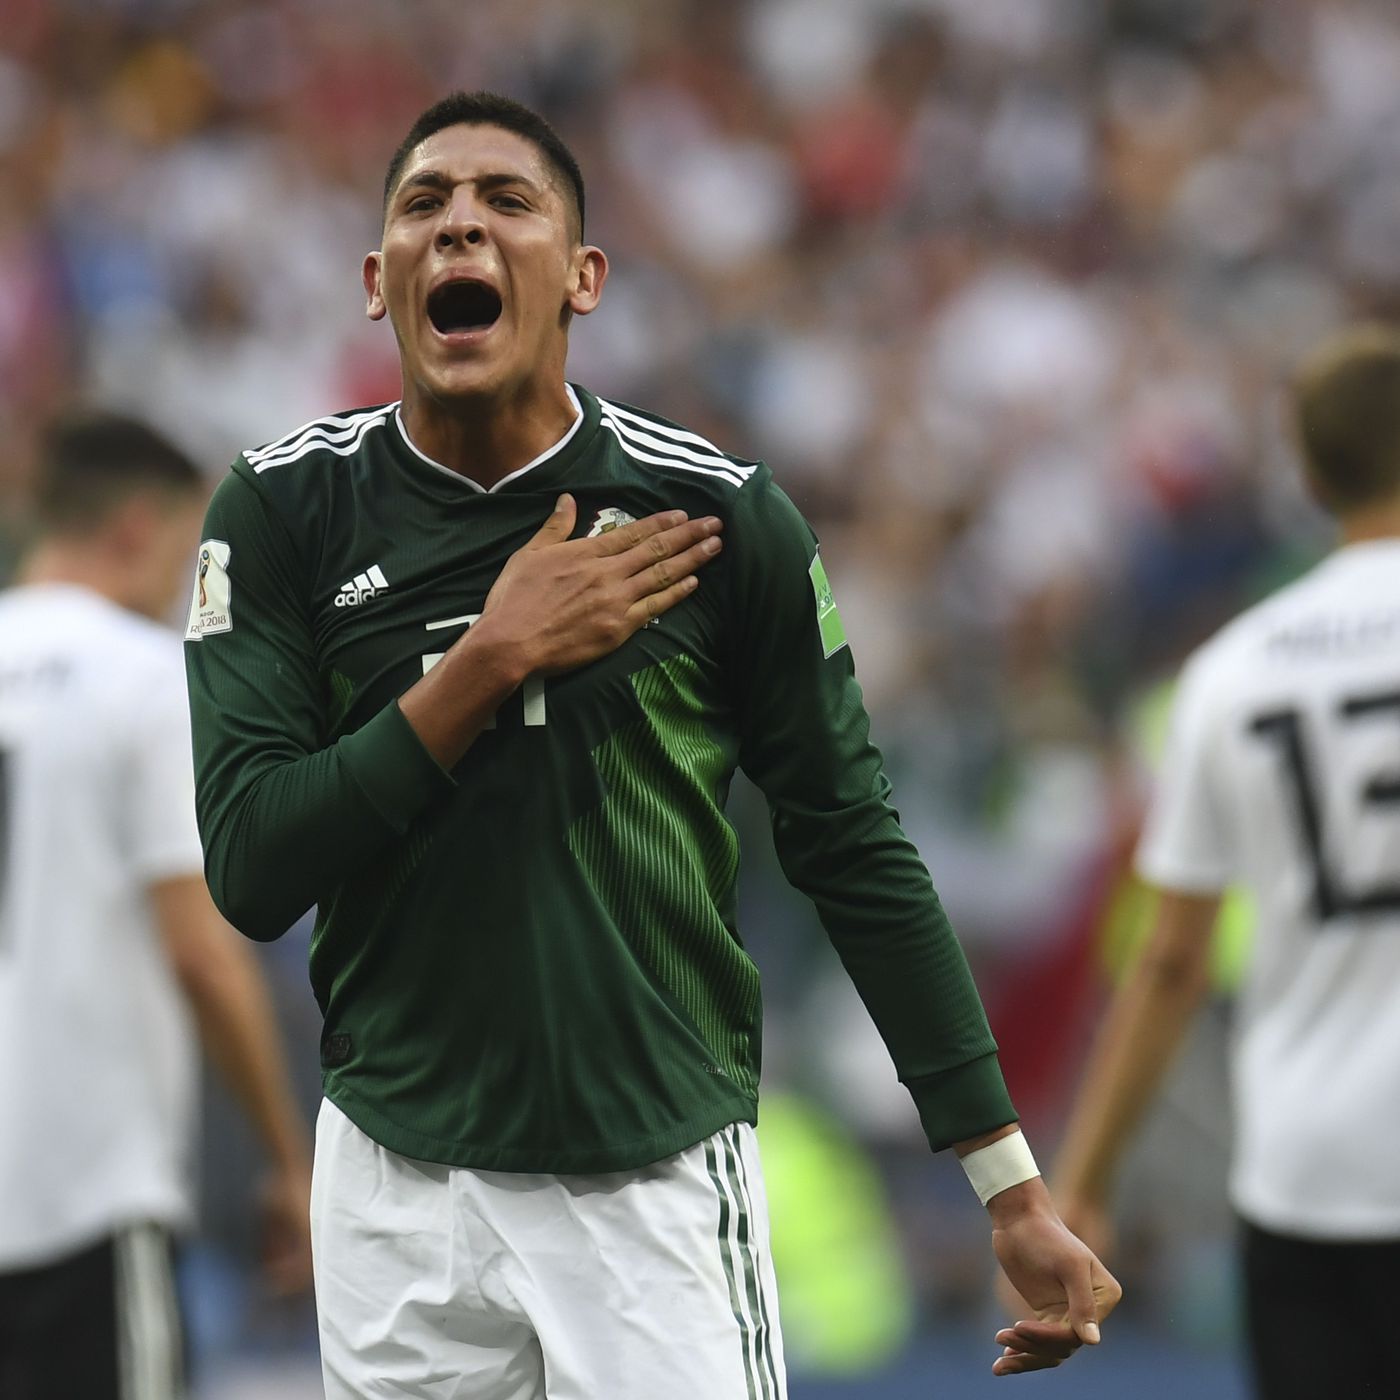 Mexico's Edson Alvarez joins Ajax from Club América in $17m deal State Of Mind